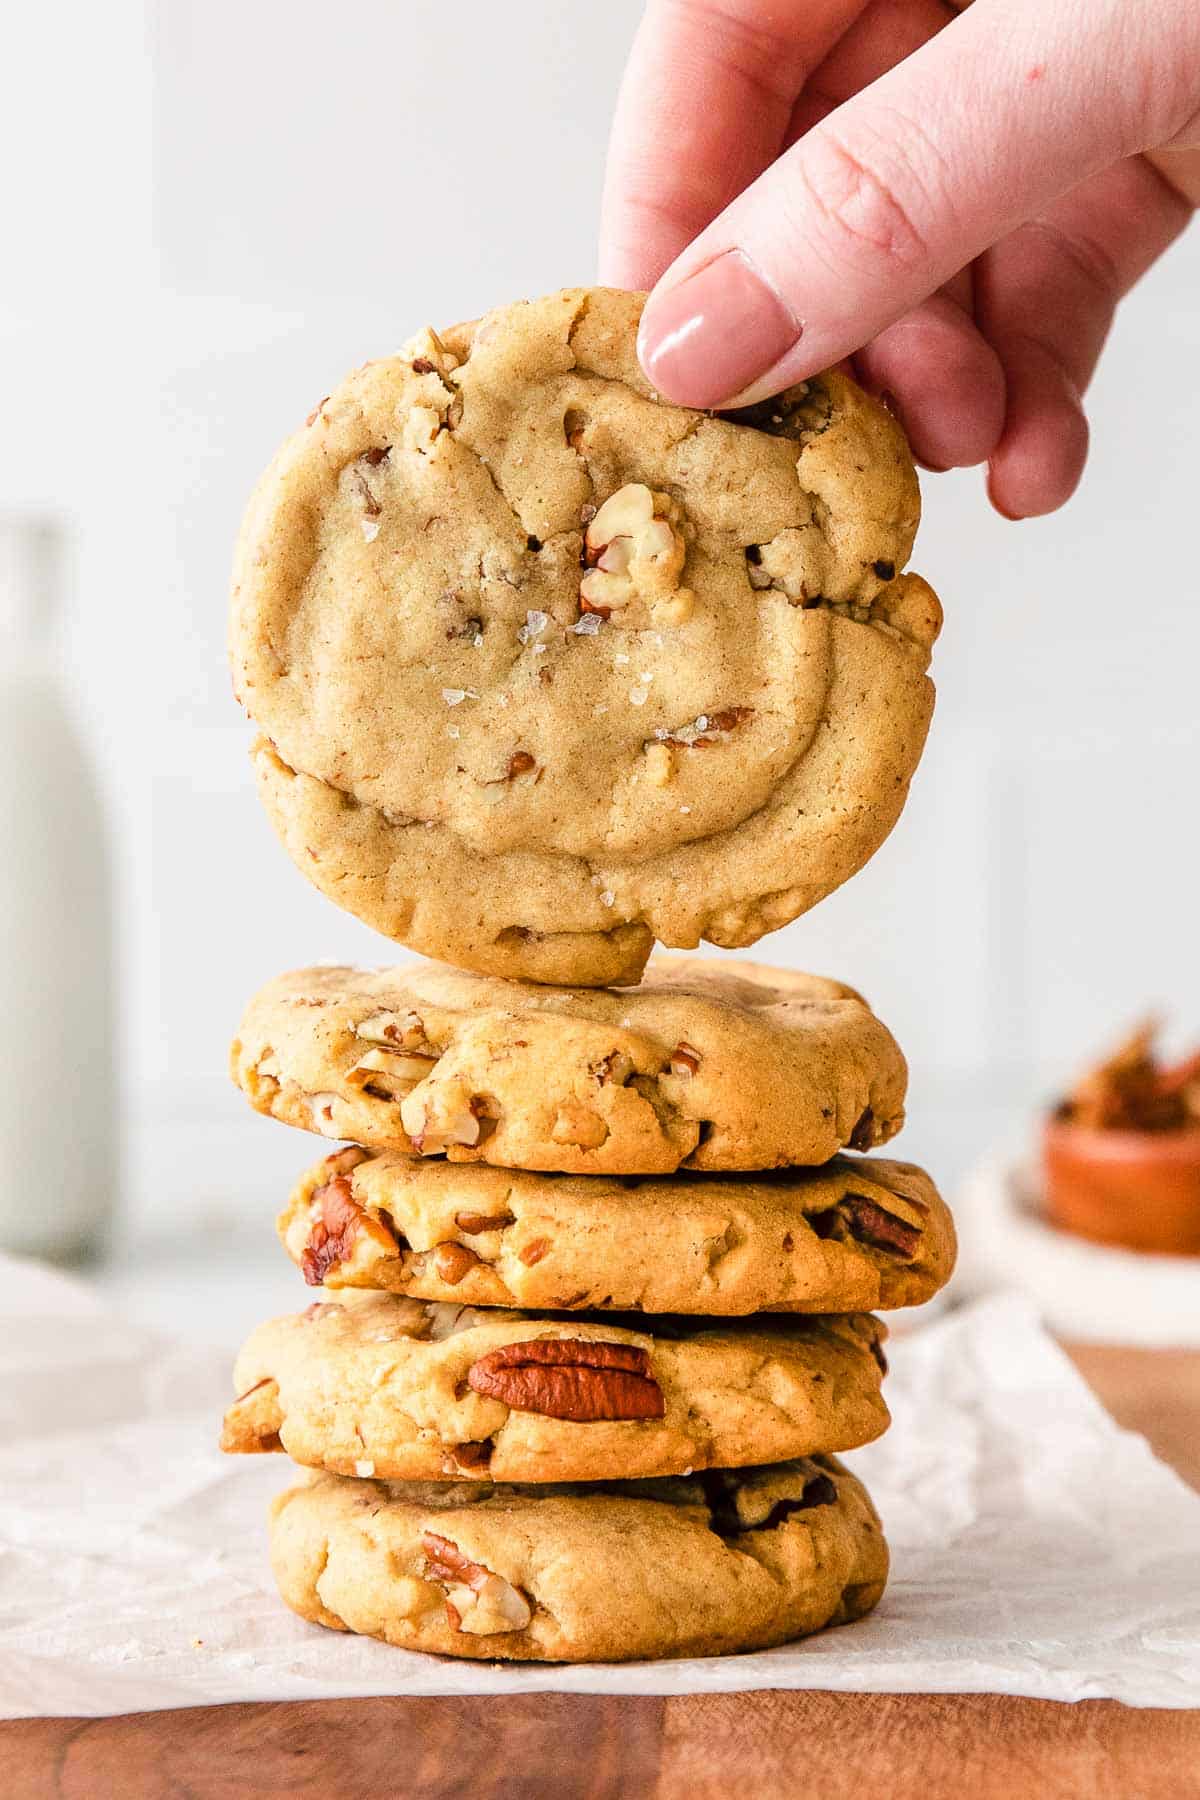 Deep South Dish: Cookie Storage - Keeping Soft Cookies Soft